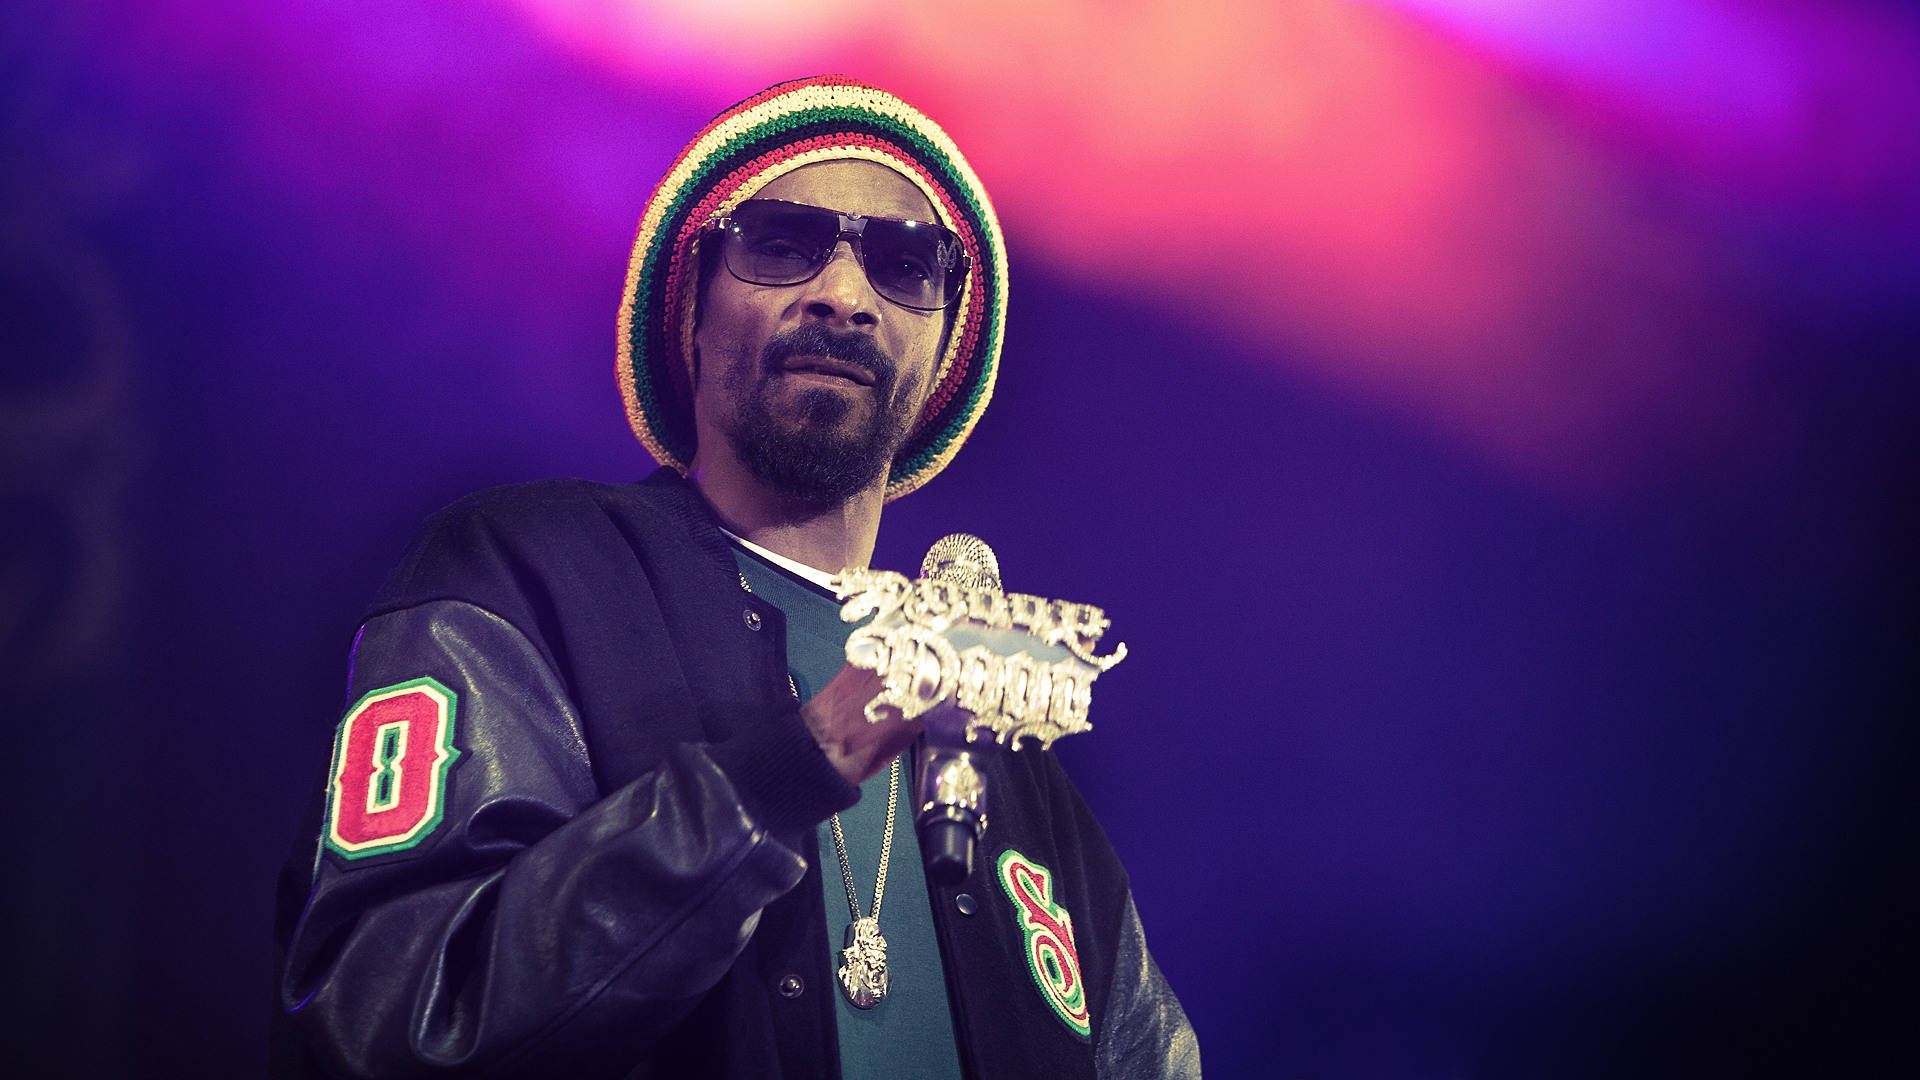 Snoop Dogg With Bejeweled Mic Background